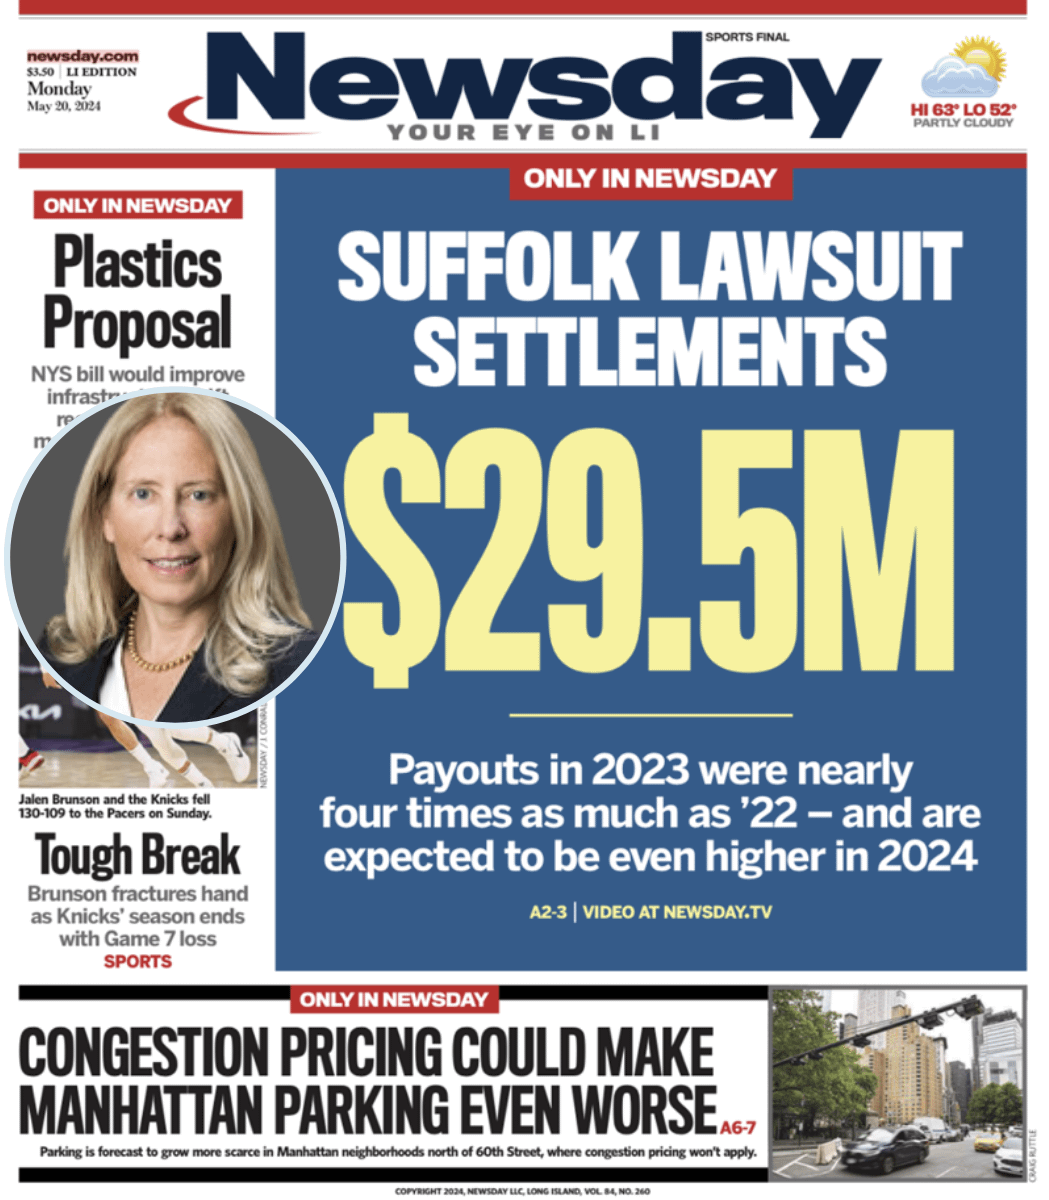 (NEWSDAY) Amy Marion Represents Client in Suffolk County Lawsuit Settlements That Top $29 Million Thumbnail